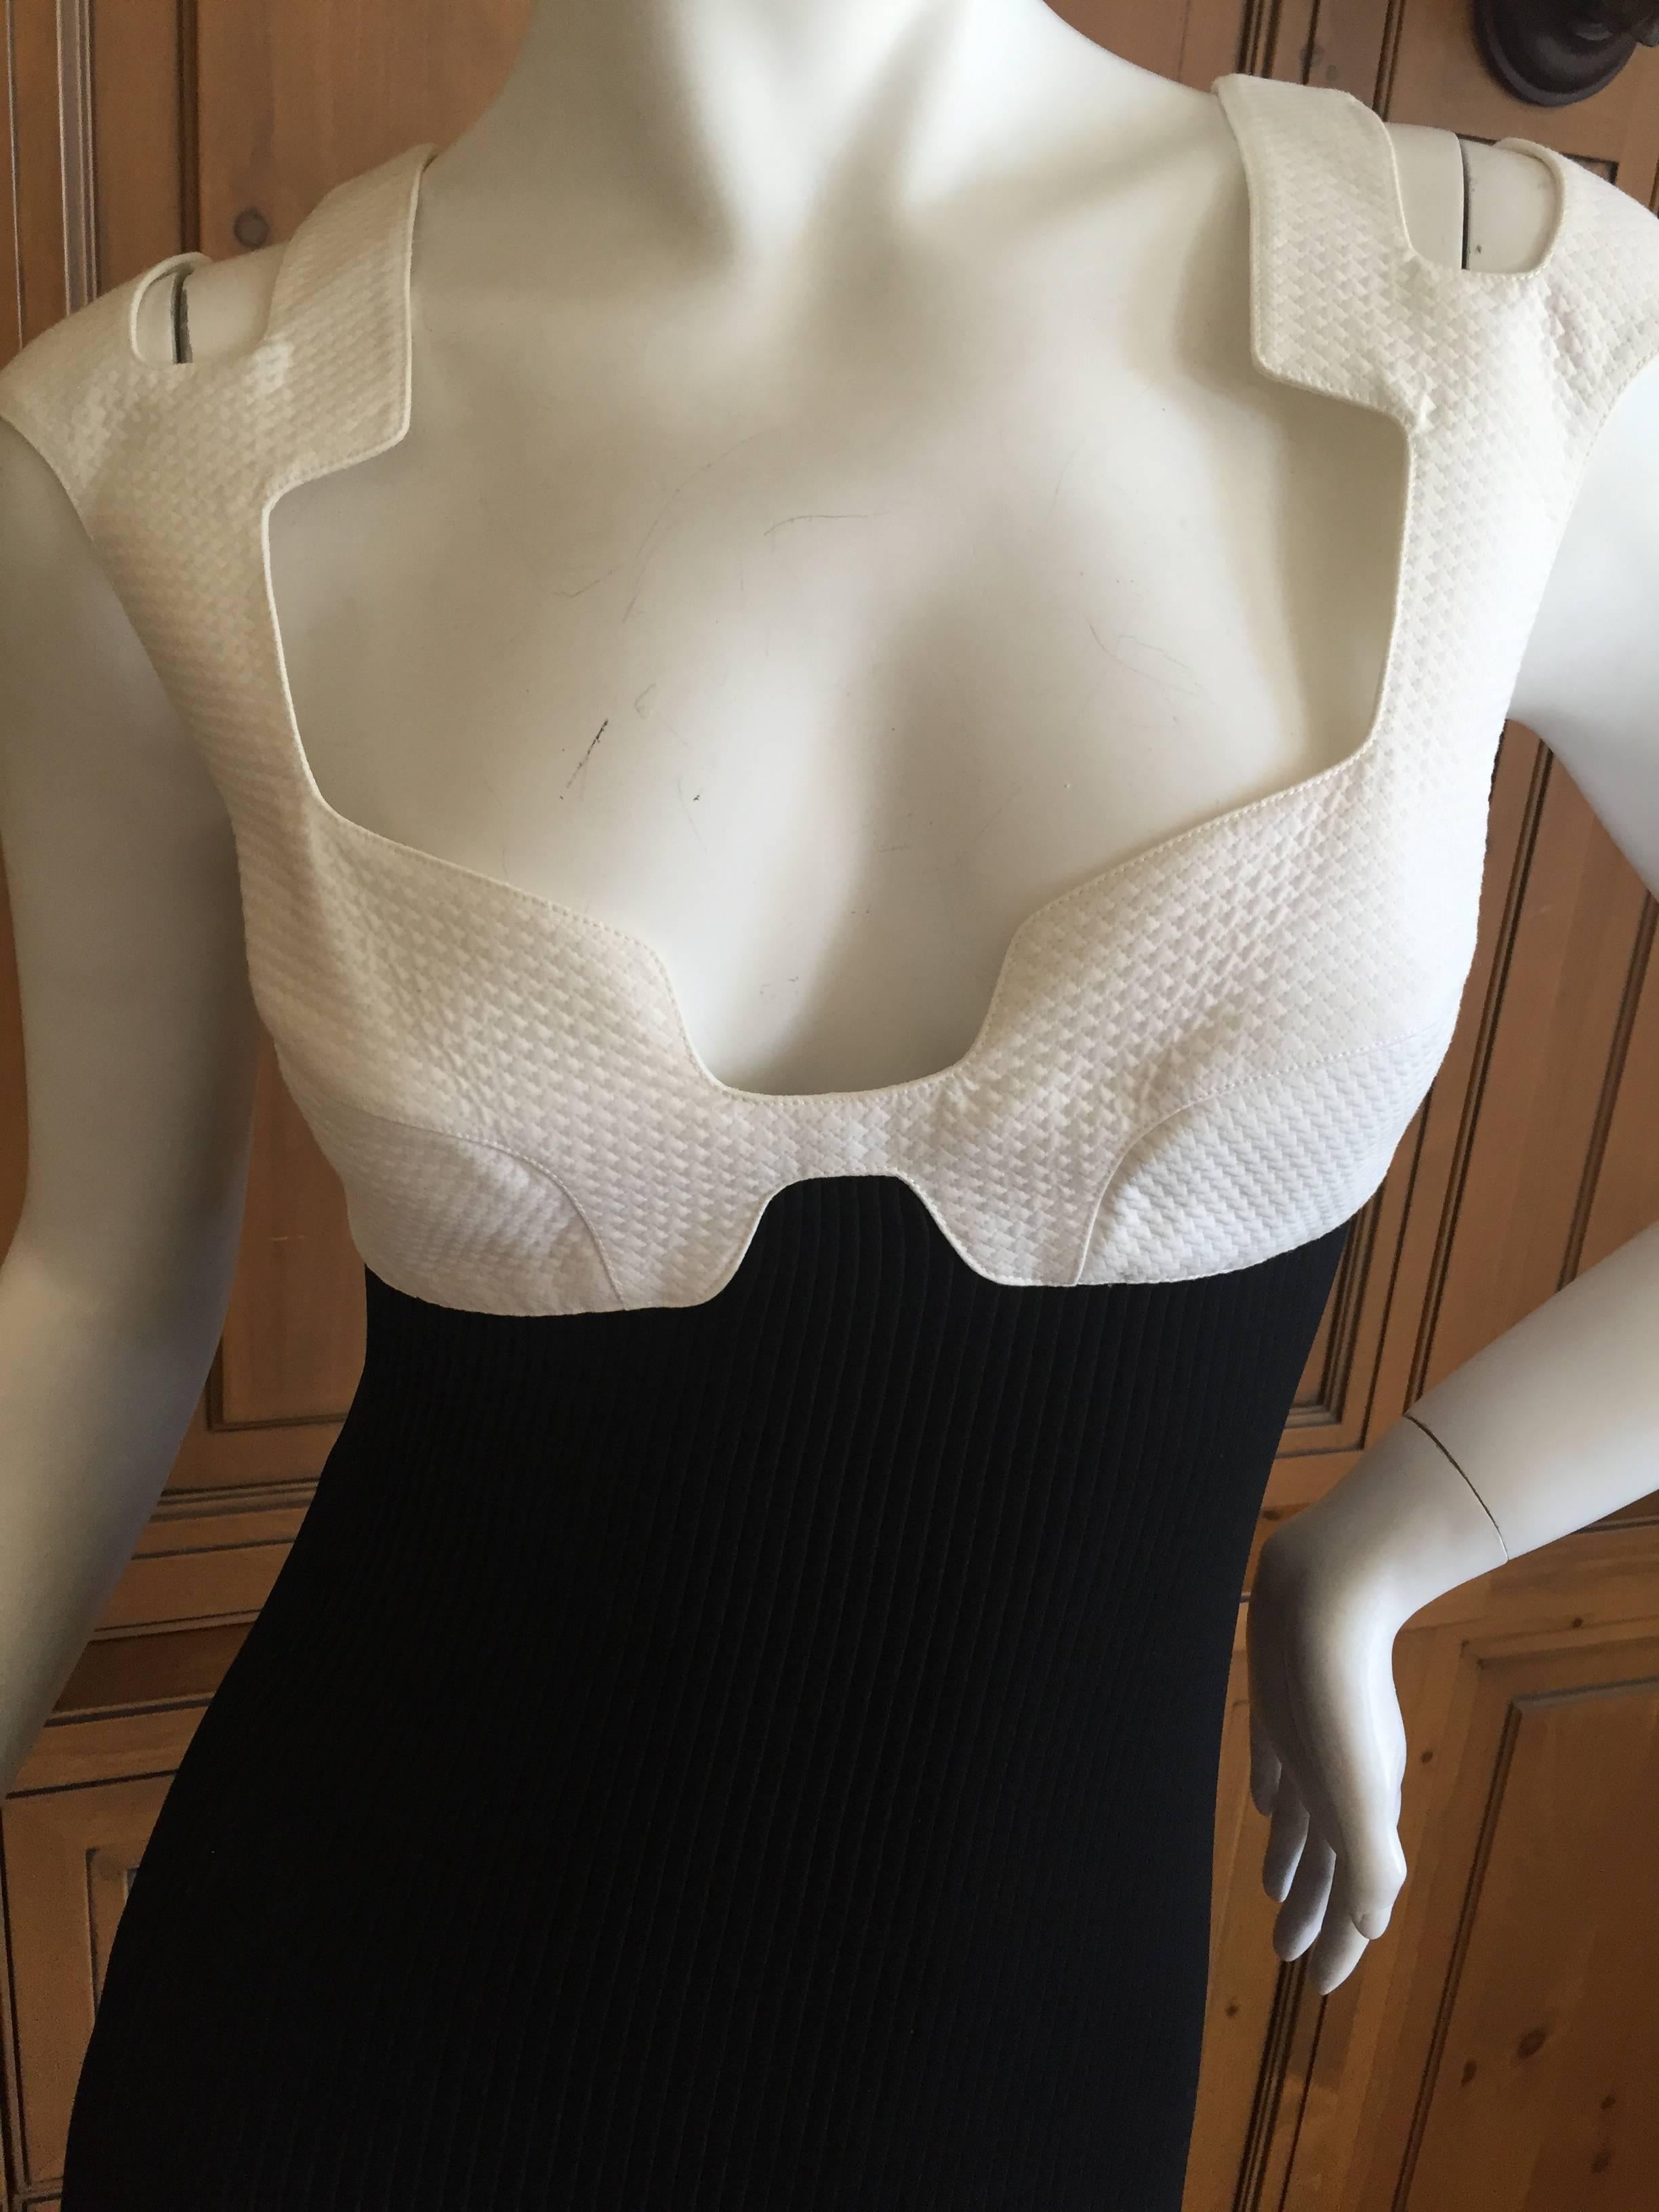 Thierry Mugler 1980's Sexy Low Cut Black & White Dress For Sale 3